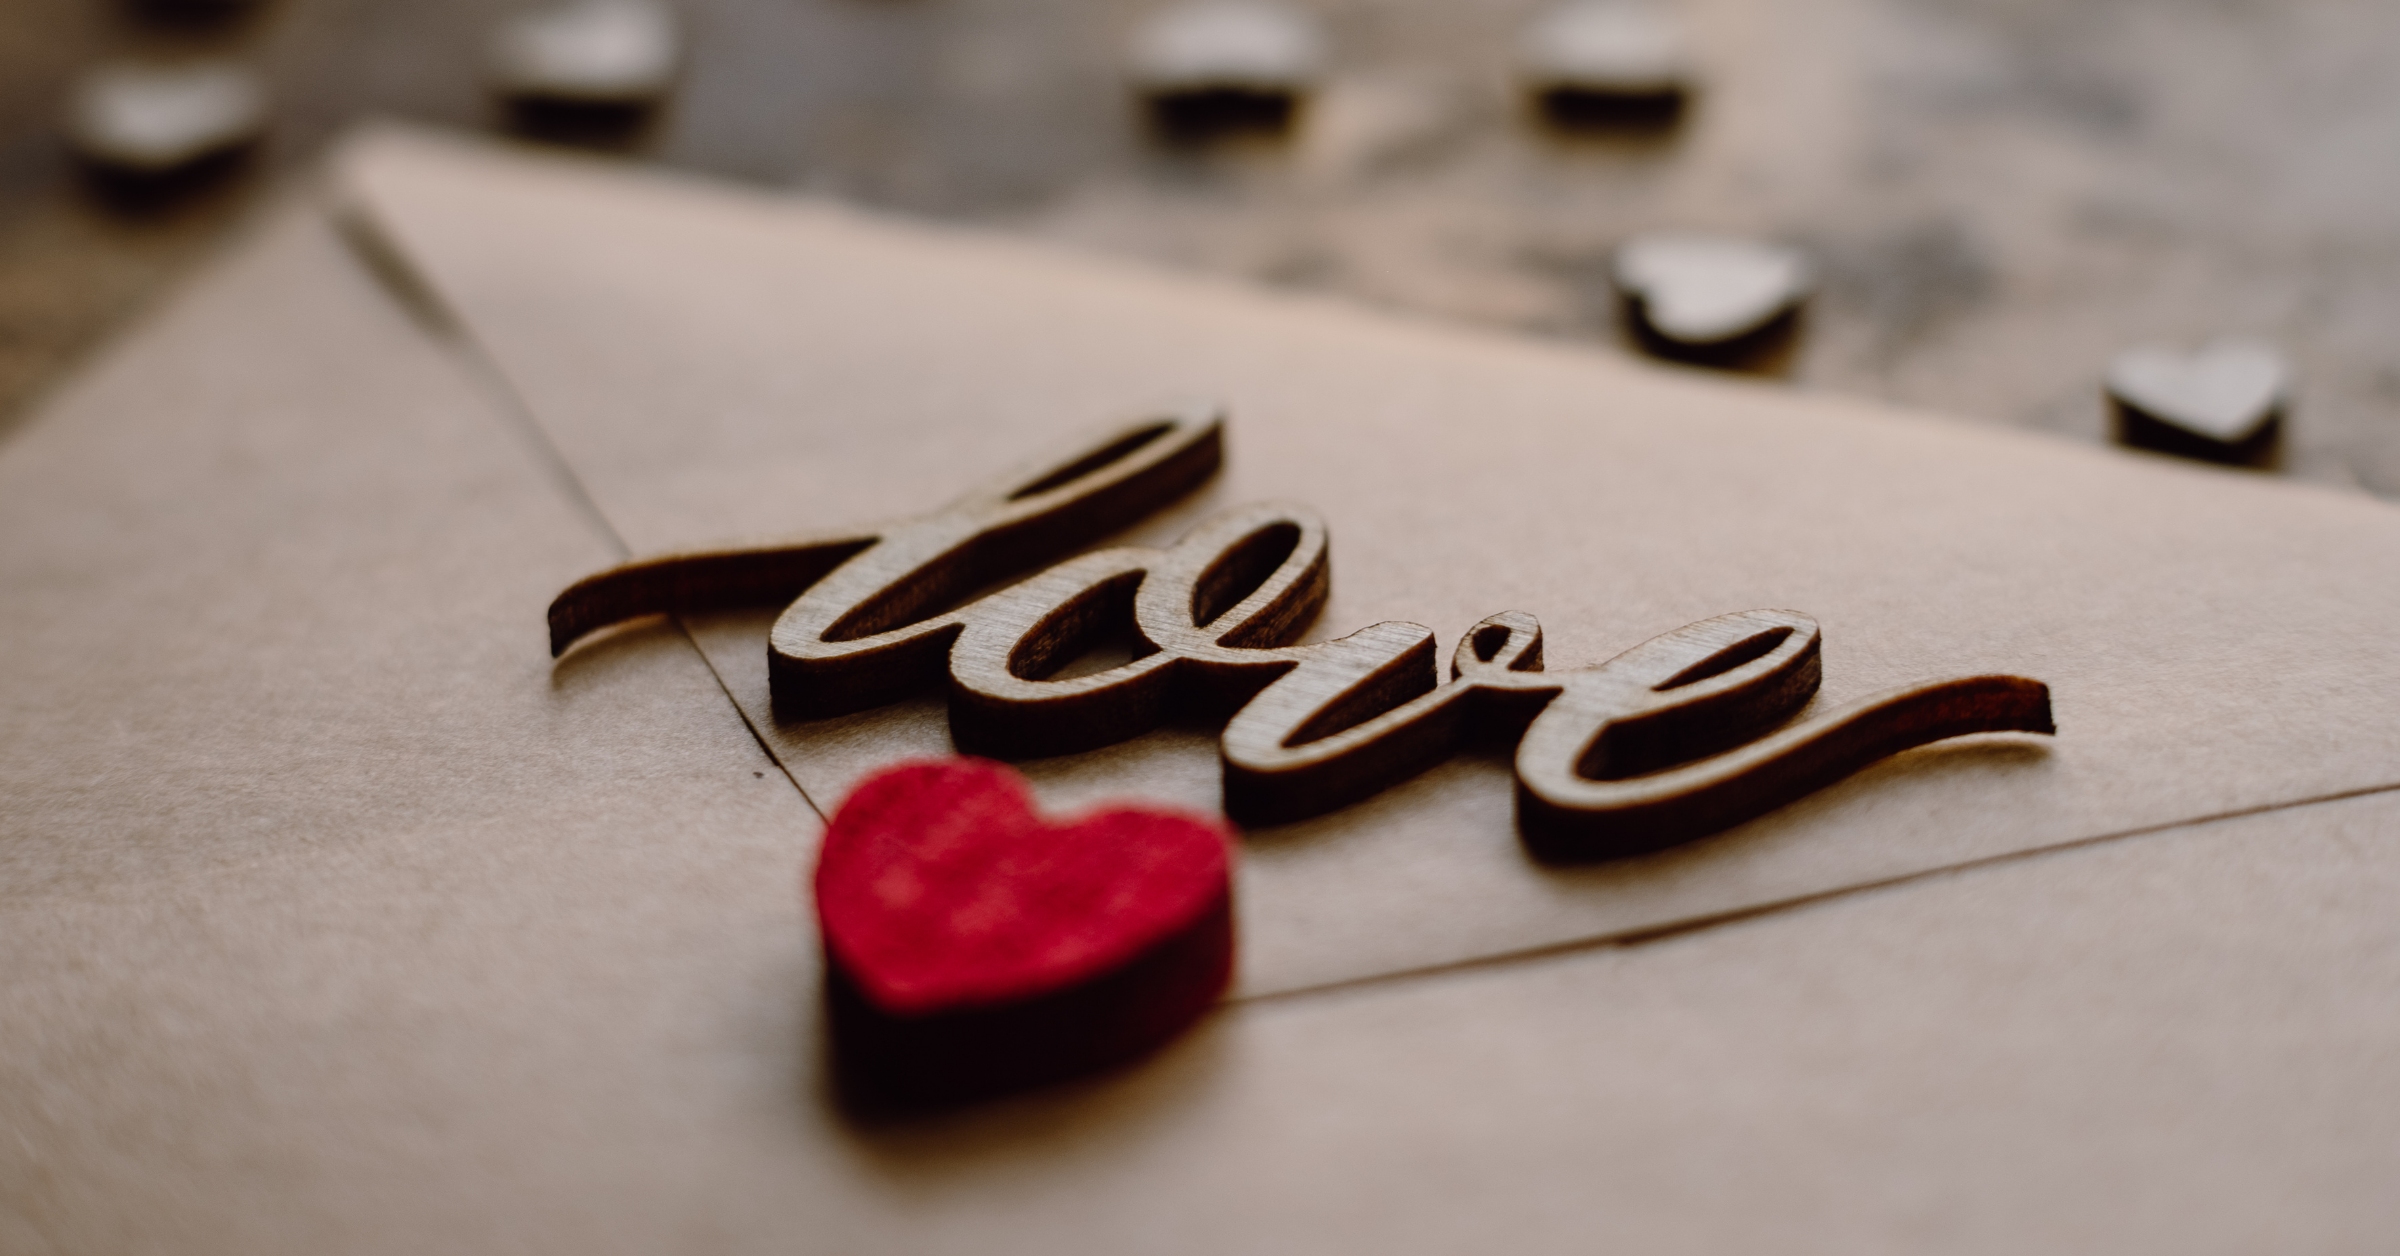 15 Ideas for a Self-Love Valentine's Day | FR Featured Image II